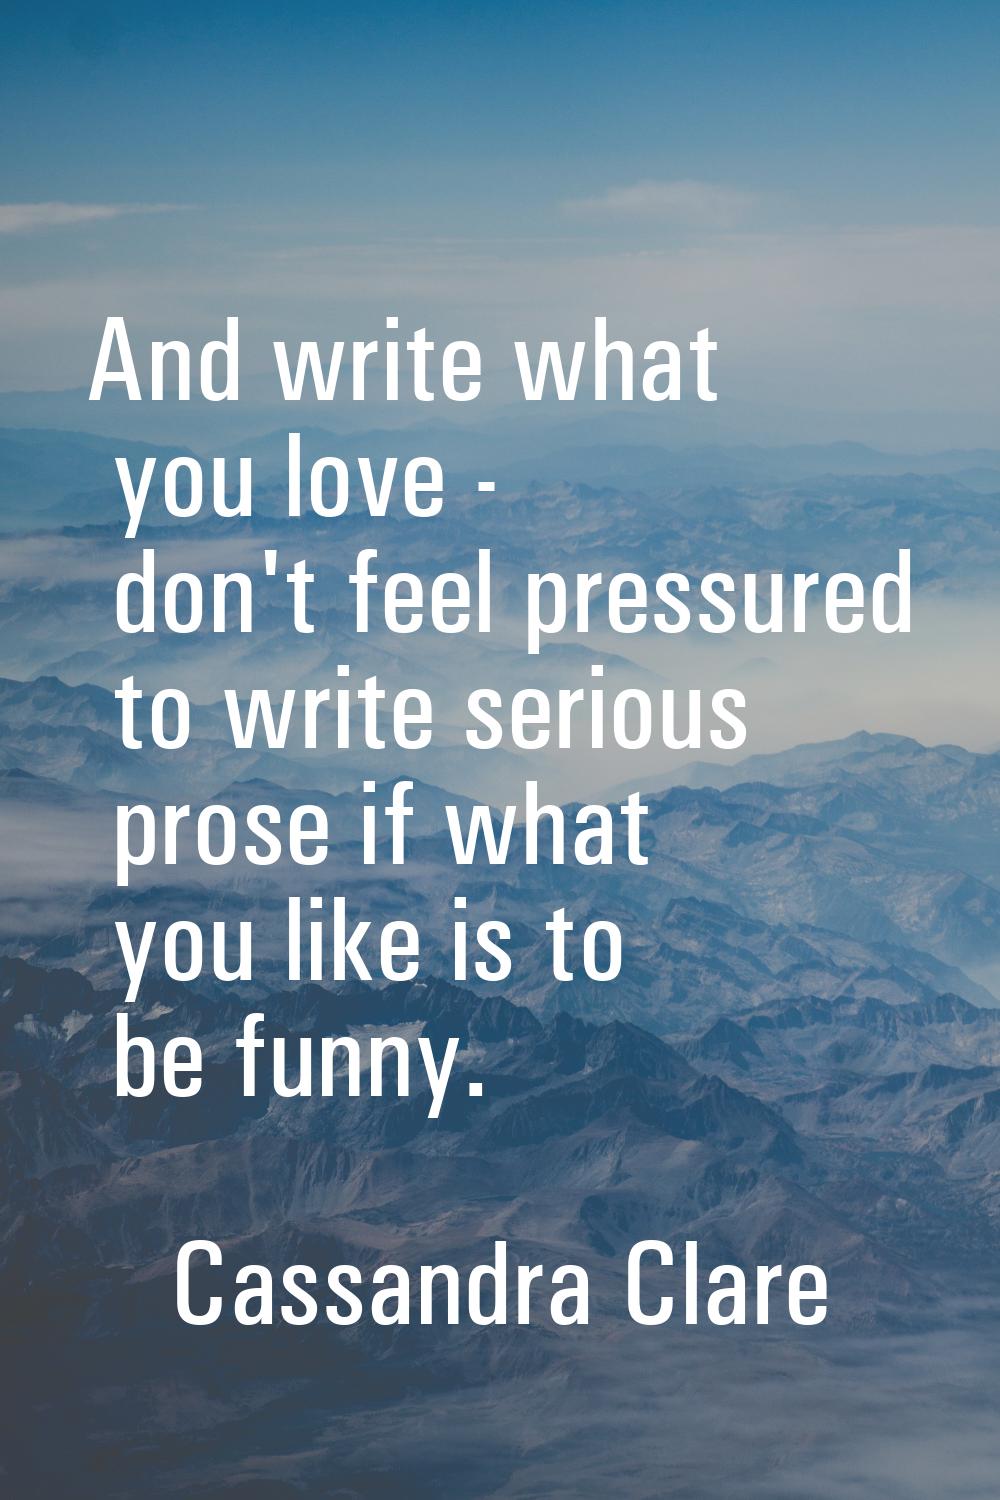 And write what you love - don't feel pressured to write serious prose if what you like is to be fun